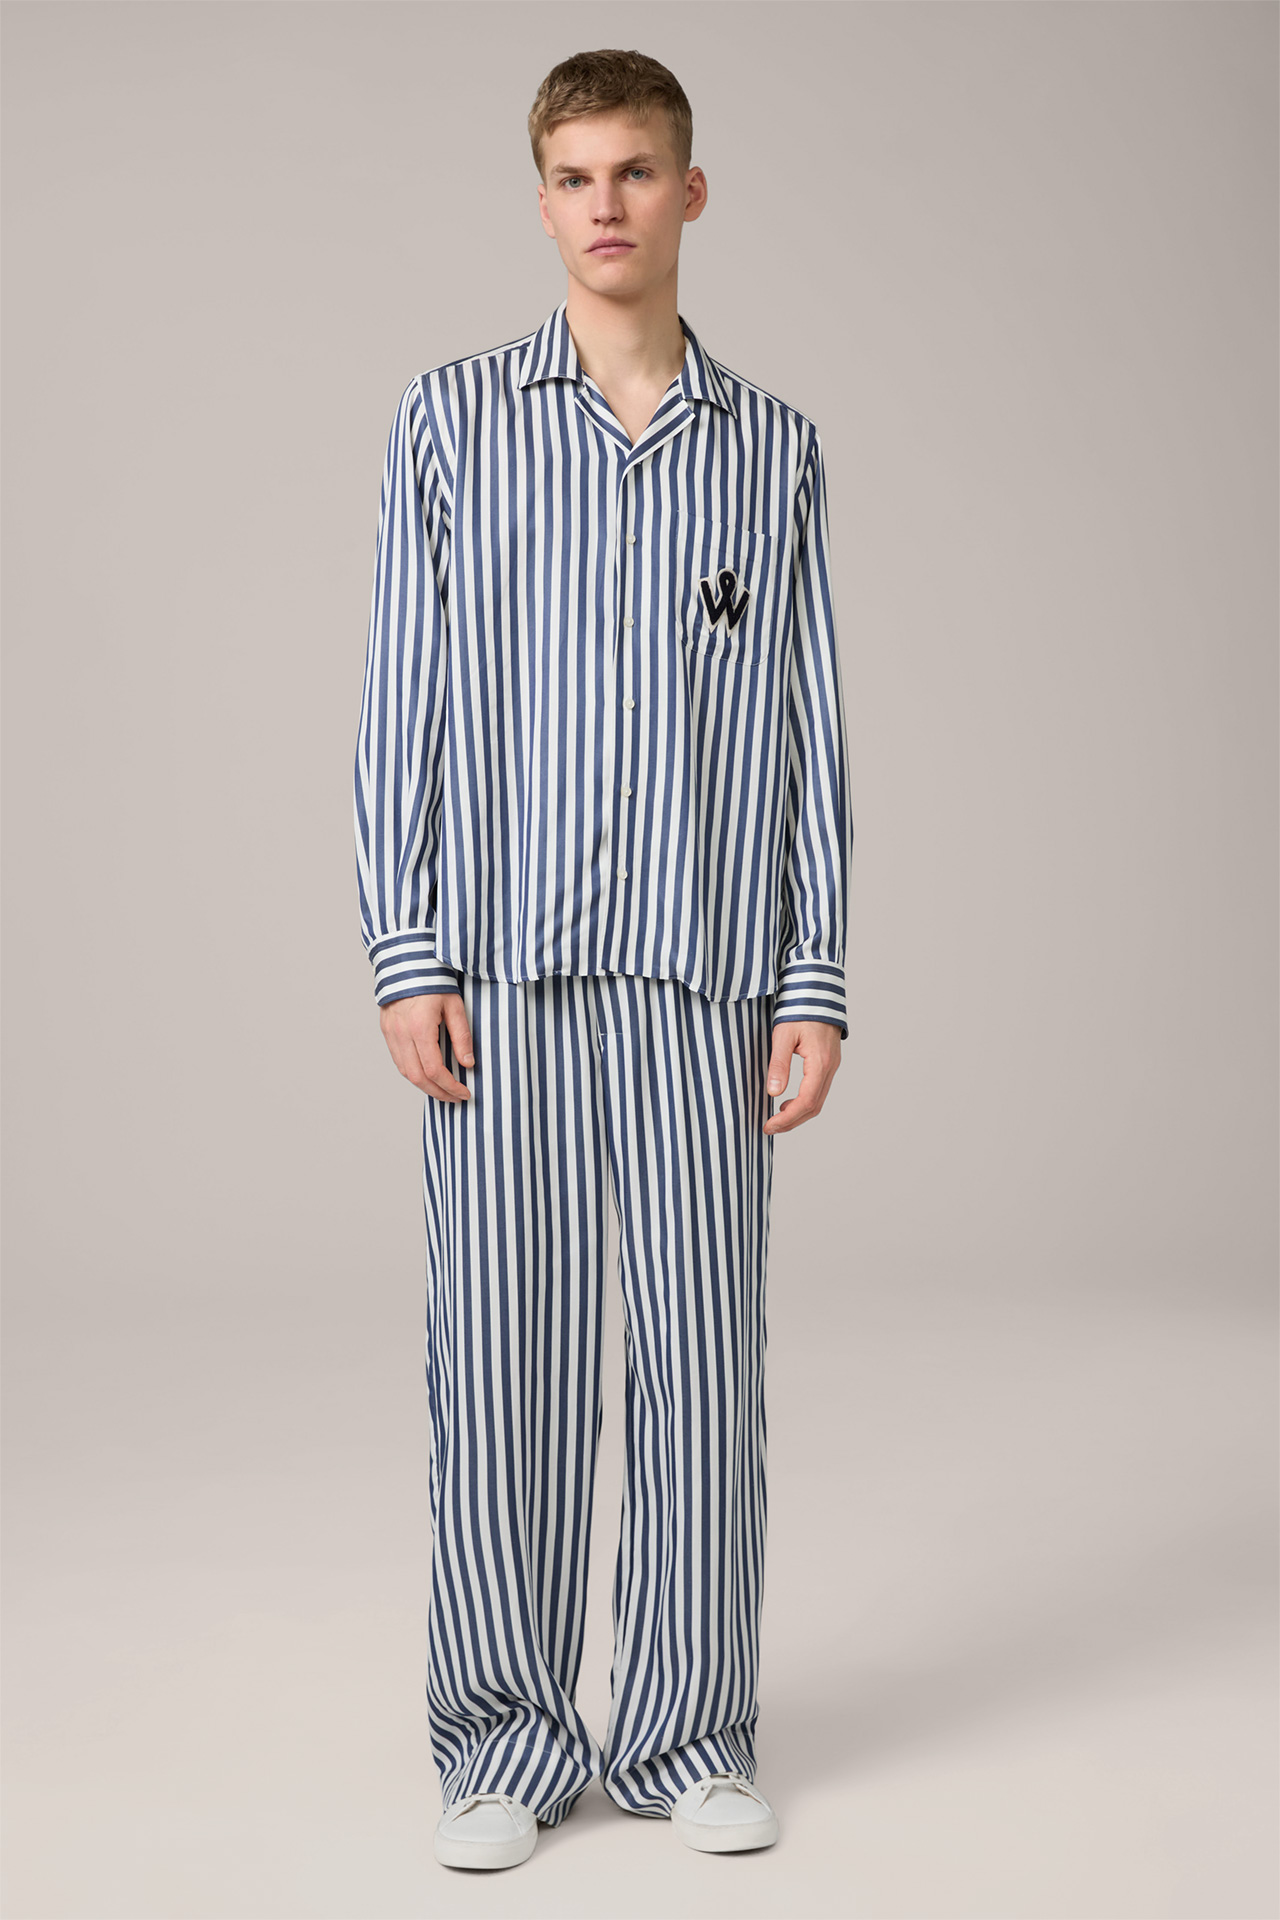 Unisex pajama pants made of lyocell in navy striped